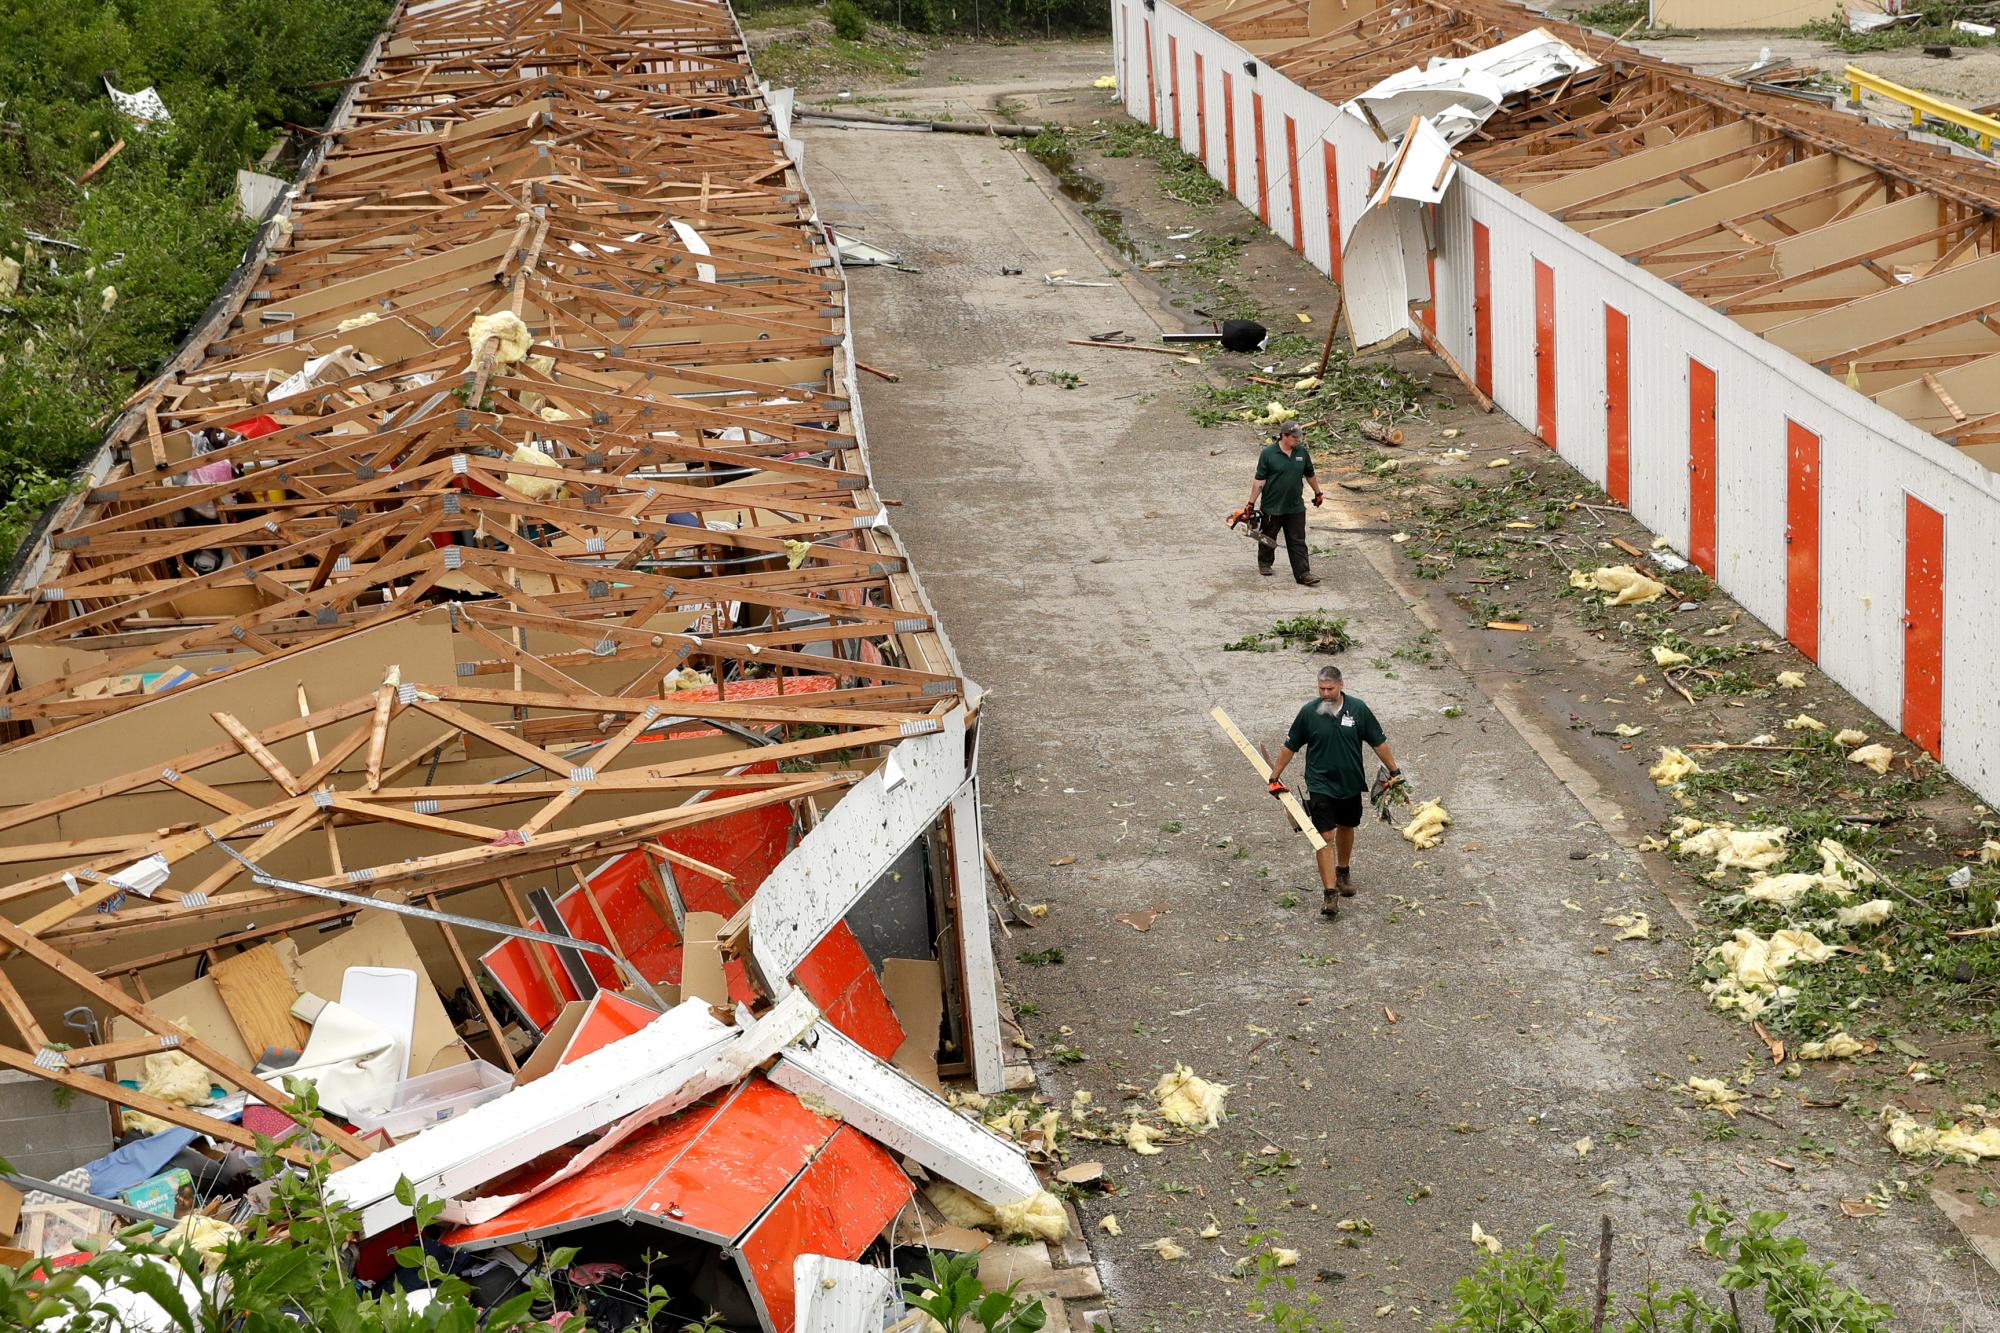 Workers pick up debris at destroyed storage units Thursday, May 23, 2019 after a tornado tore though Jefferson City, Mo. late Wednesday. (